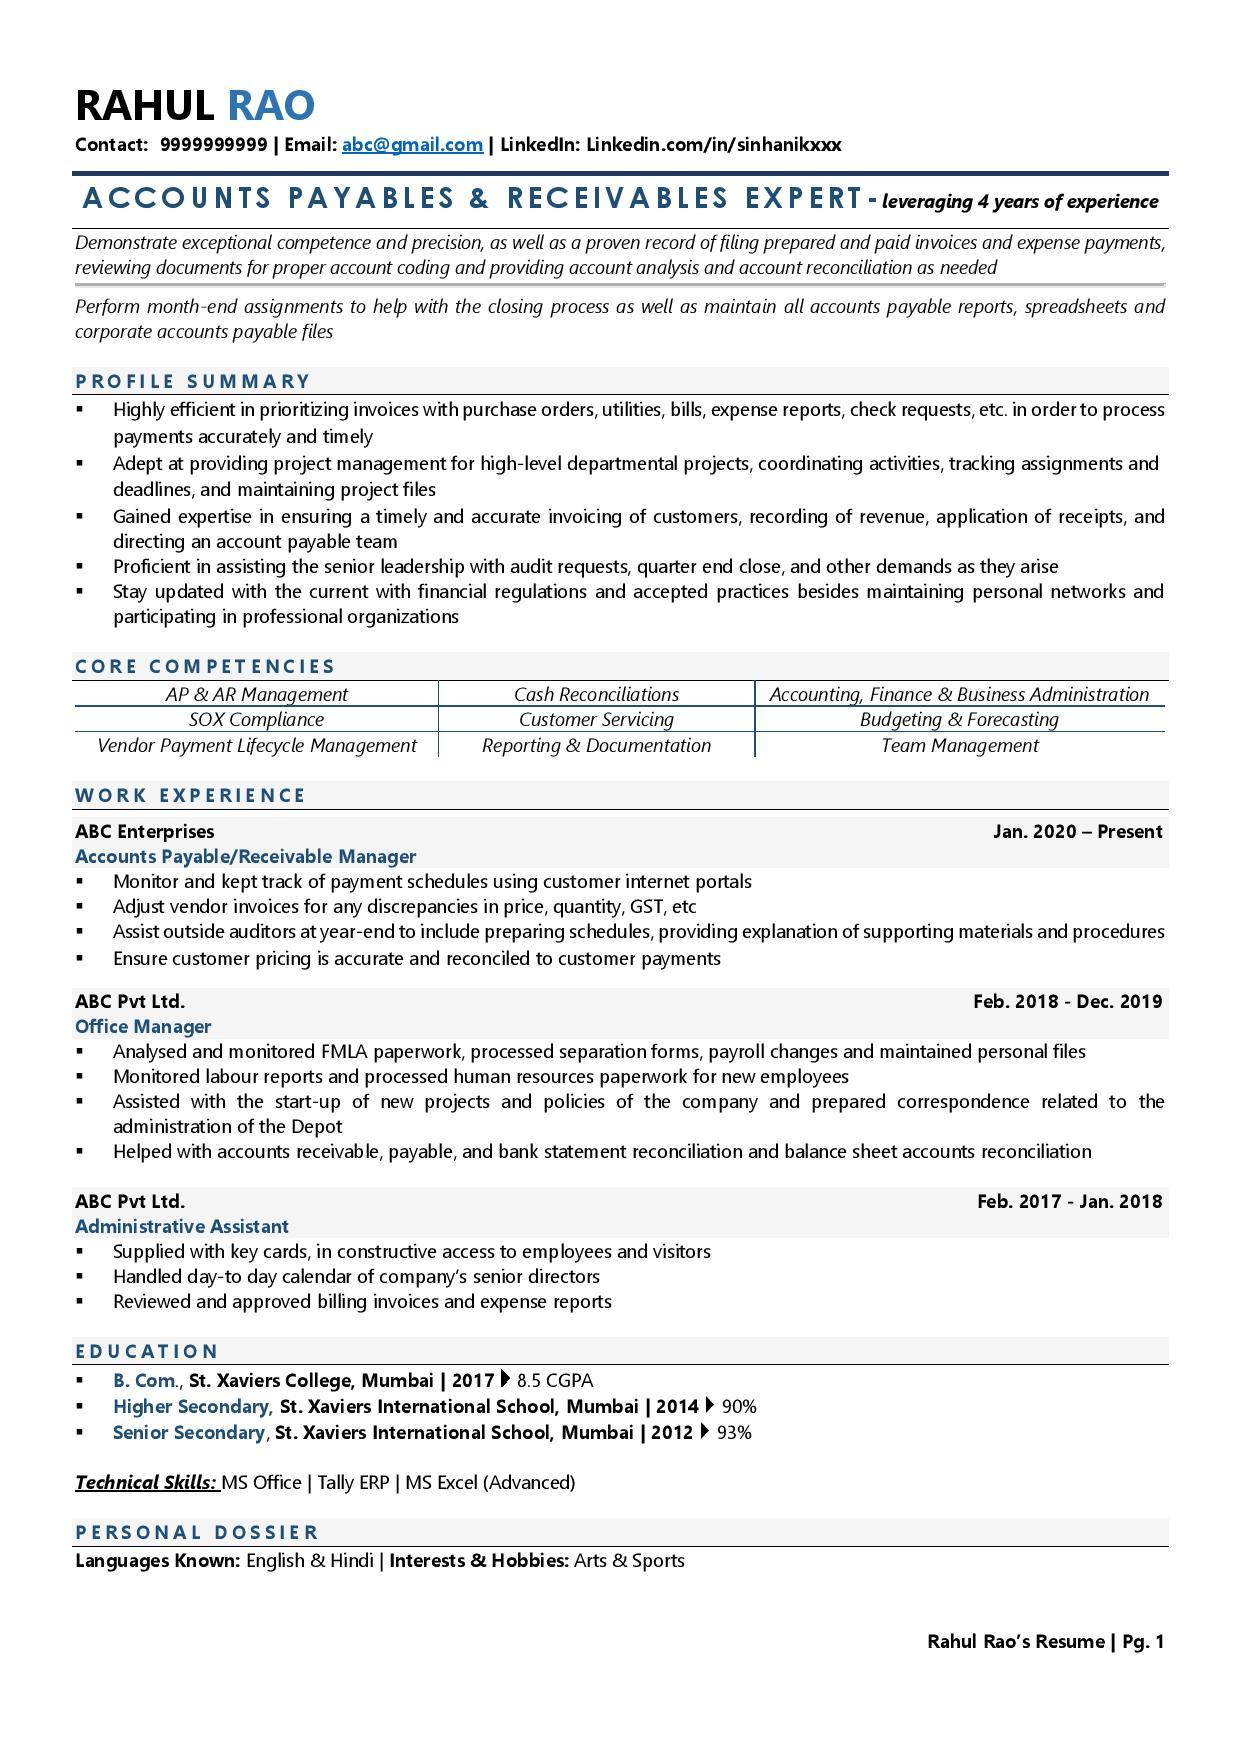 Accounts Payable & Receivable - Resume Example & Template